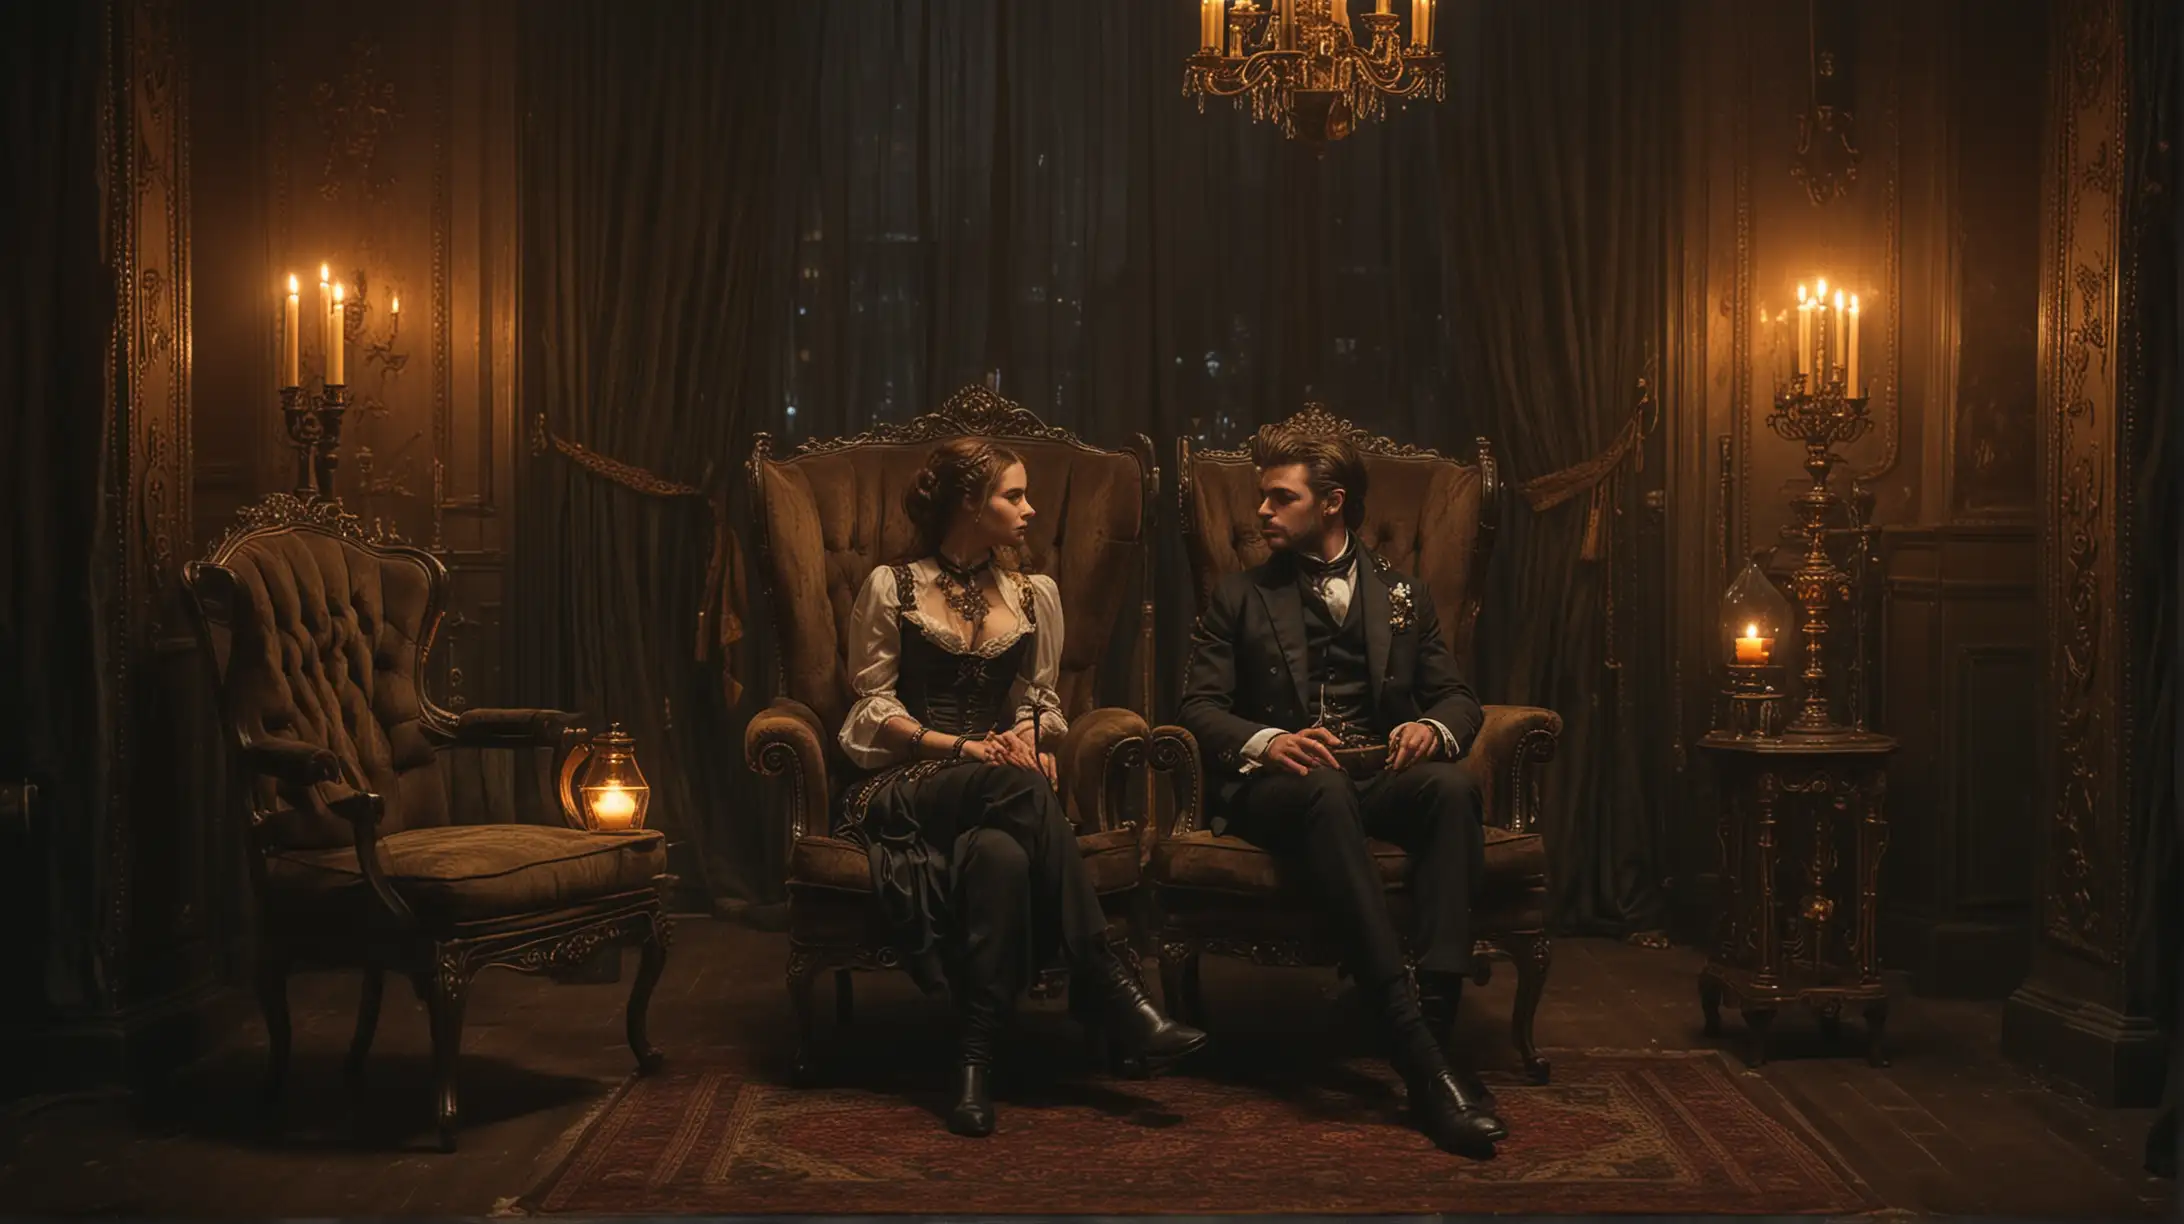 Steampunk Couple Relaxing in Lavishly Decorated Dimly Lit Living Room